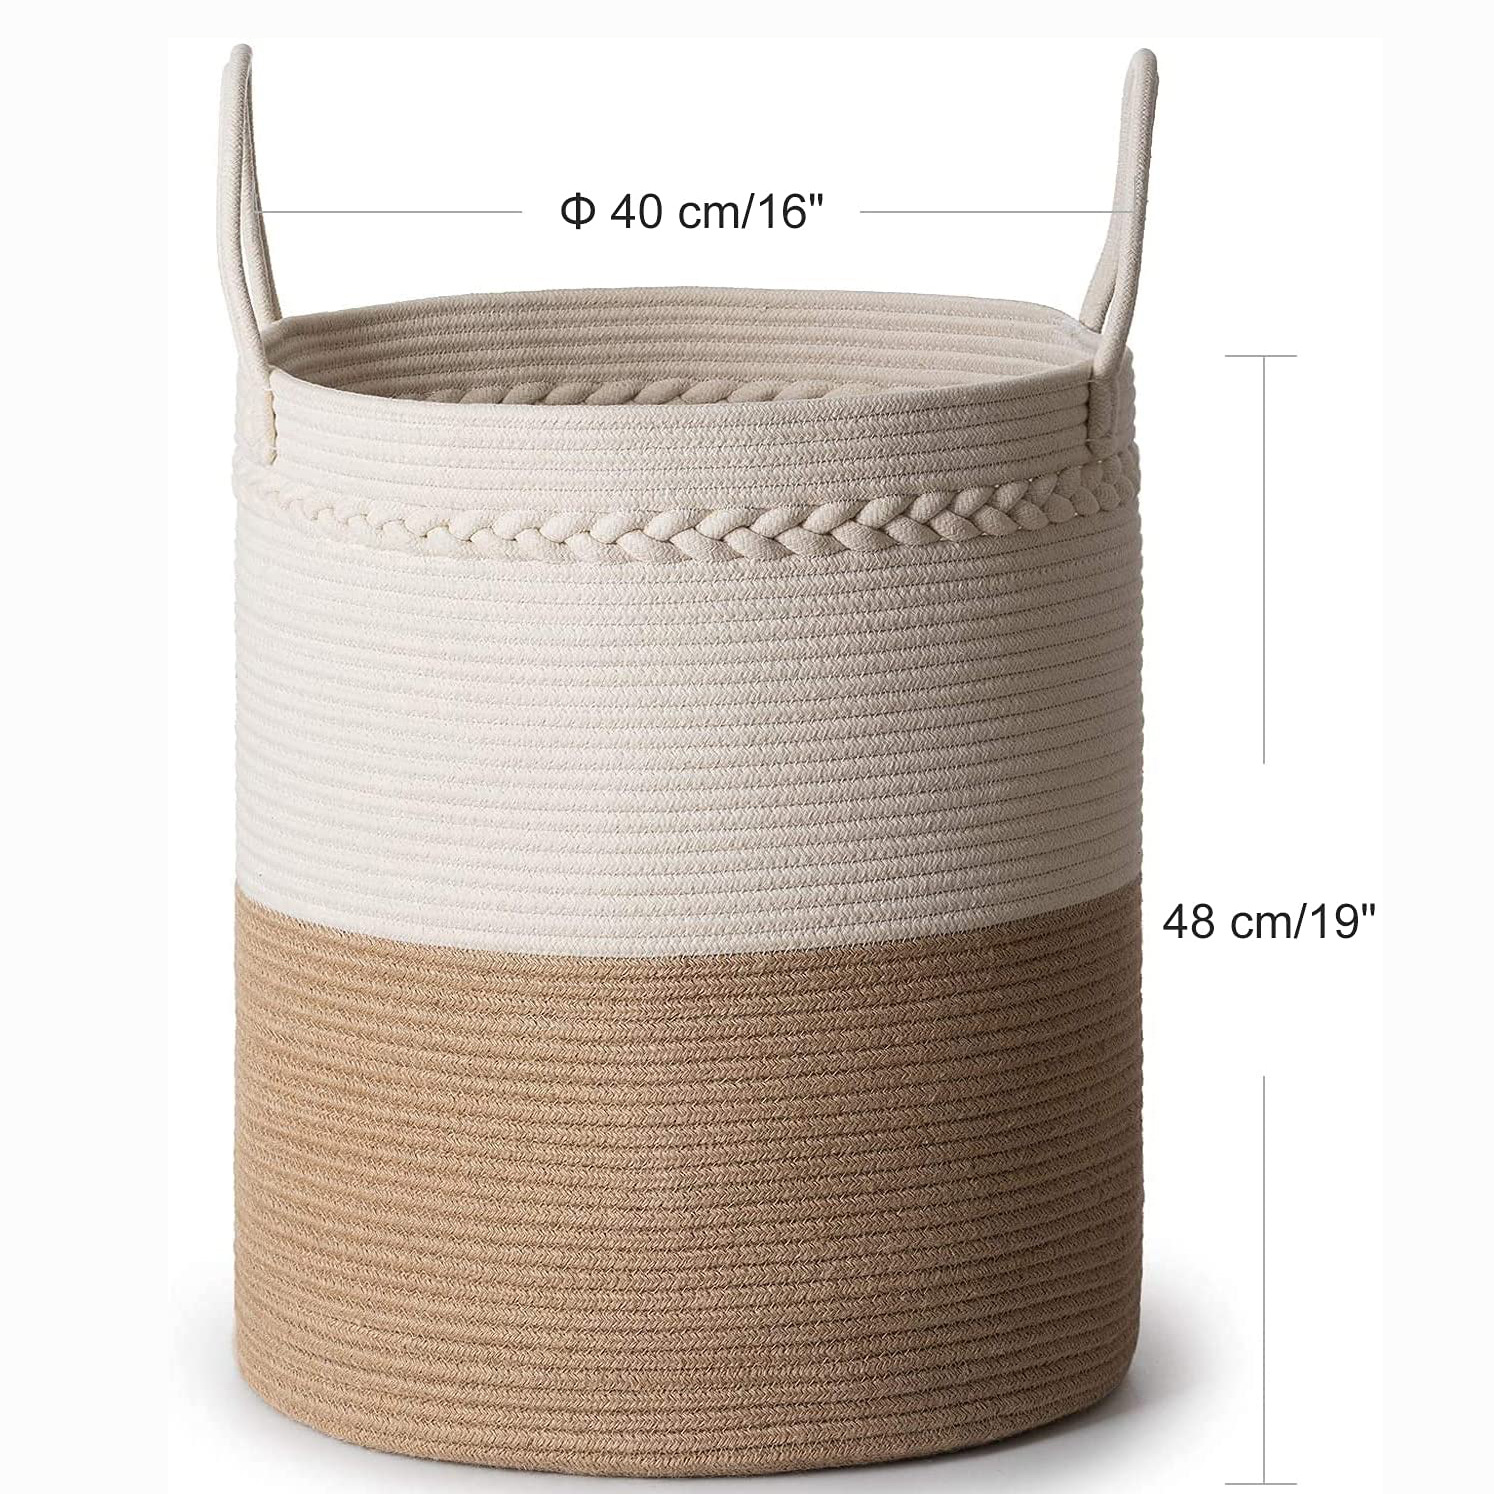 Nordic Style Cotton String Woven Clothing Storage Bucket Laundry Basket